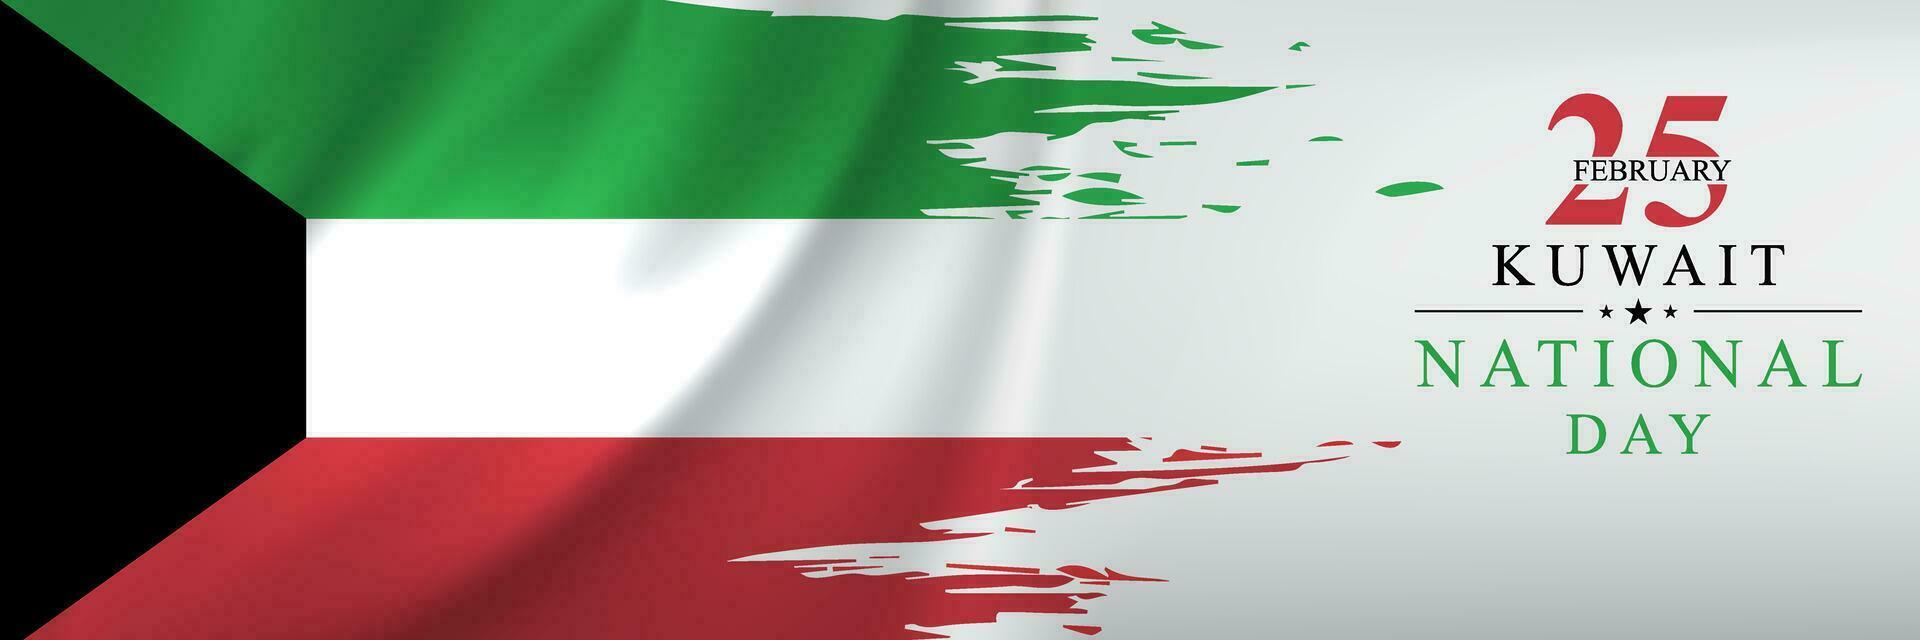 February 25, Kuwait national day. It is independence day. Vector illustration for greeting card, poster and banner.